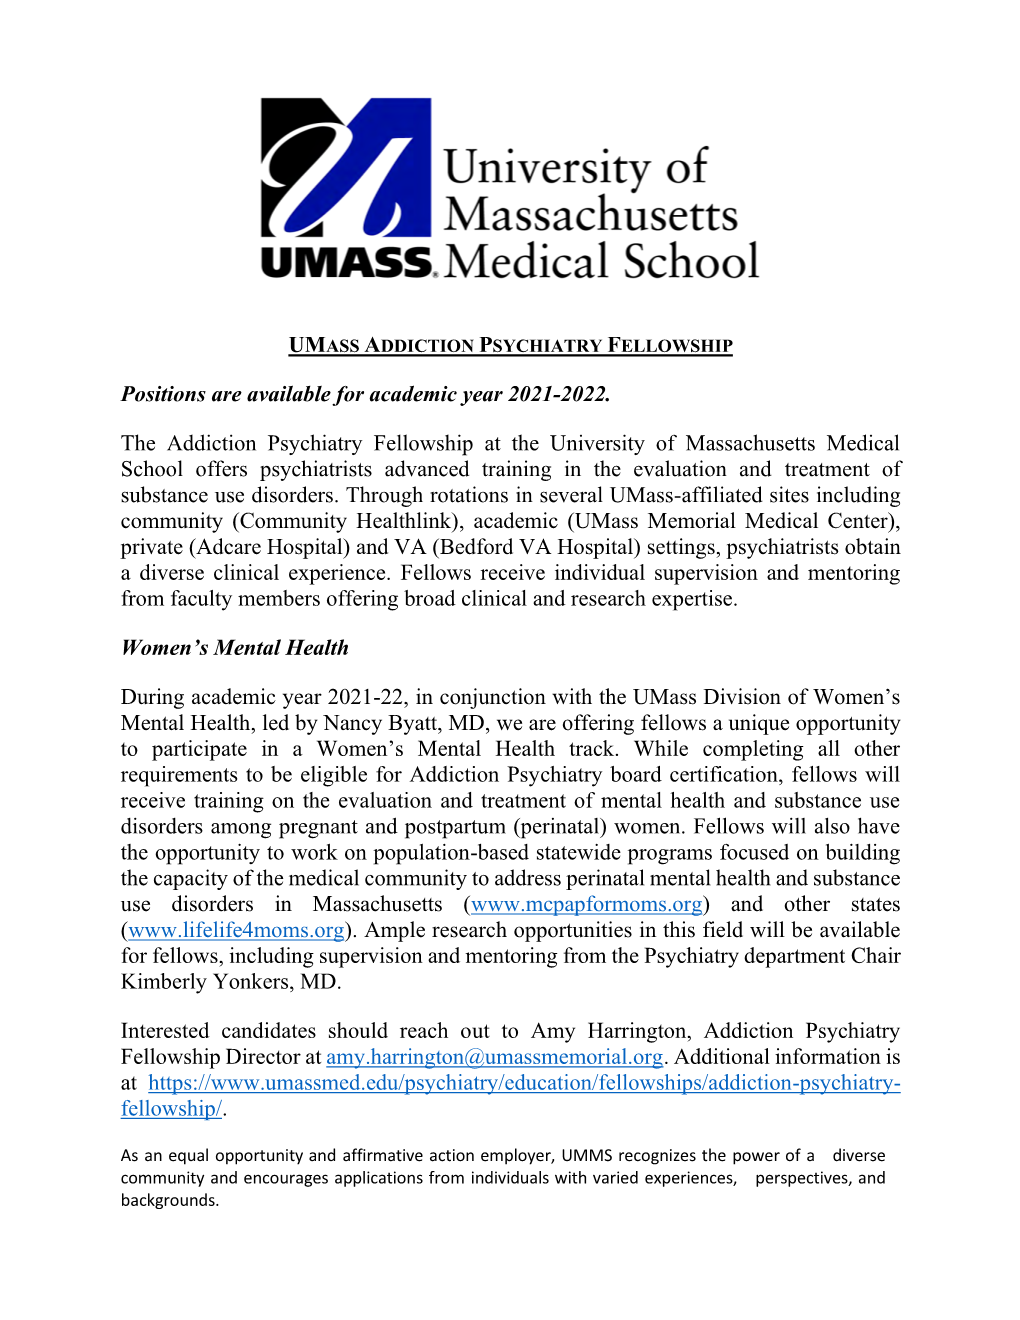 Positions Are Available for Academic Year 2021-2022. the Addiction Psychiatry Fellowship at the University of Massachusetts